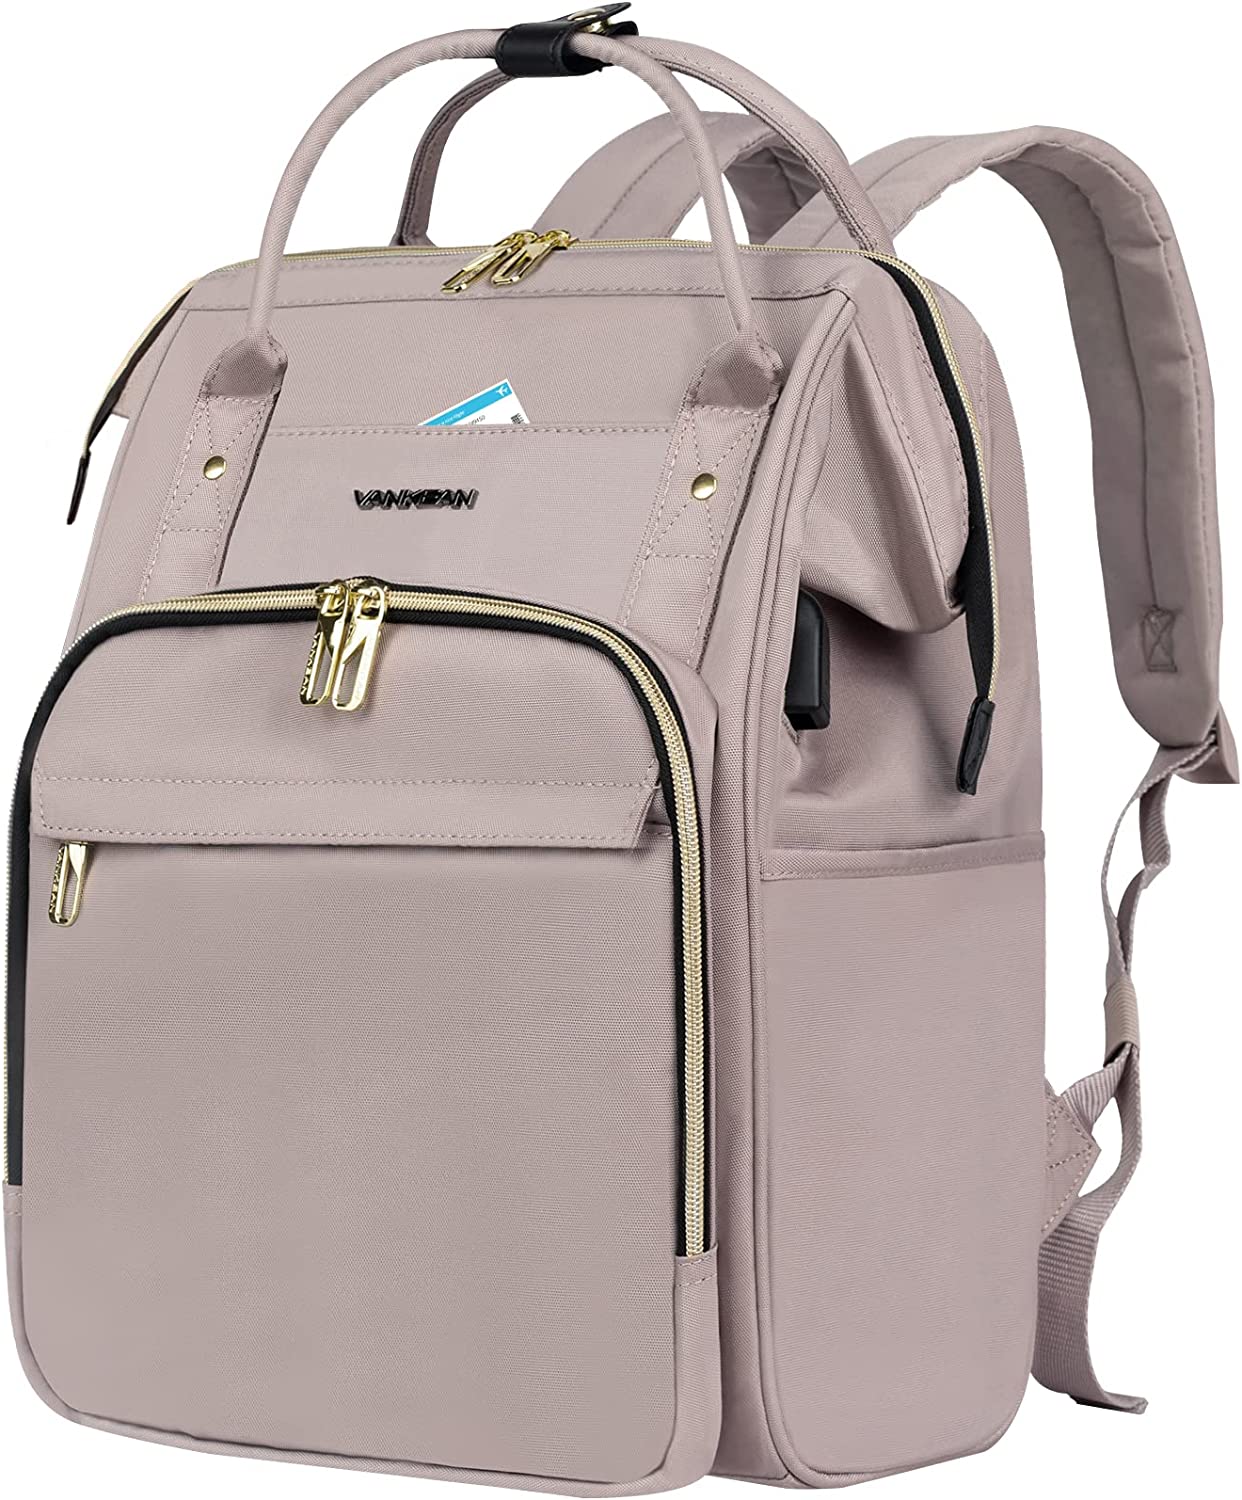 VANKEAN 15.6-16.2 Inch Laptop Backpack Carry On [...]